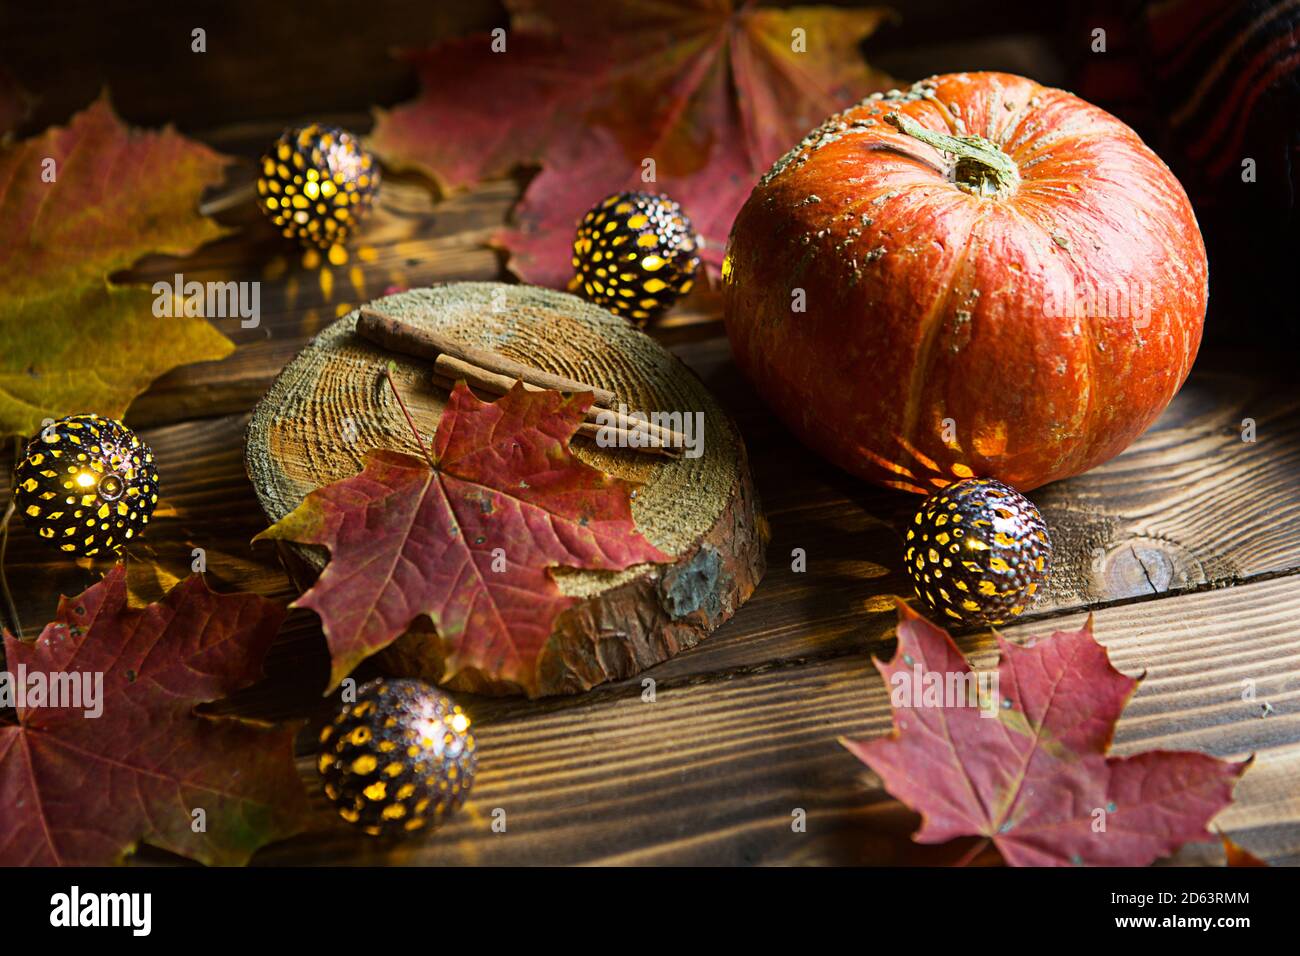 Orange natural round pumpkin on a wooden table with fallen yellow and red maple leaves, cinnamon sticks. Lights garlands, warm autumn atmosphere, than Stock Photo